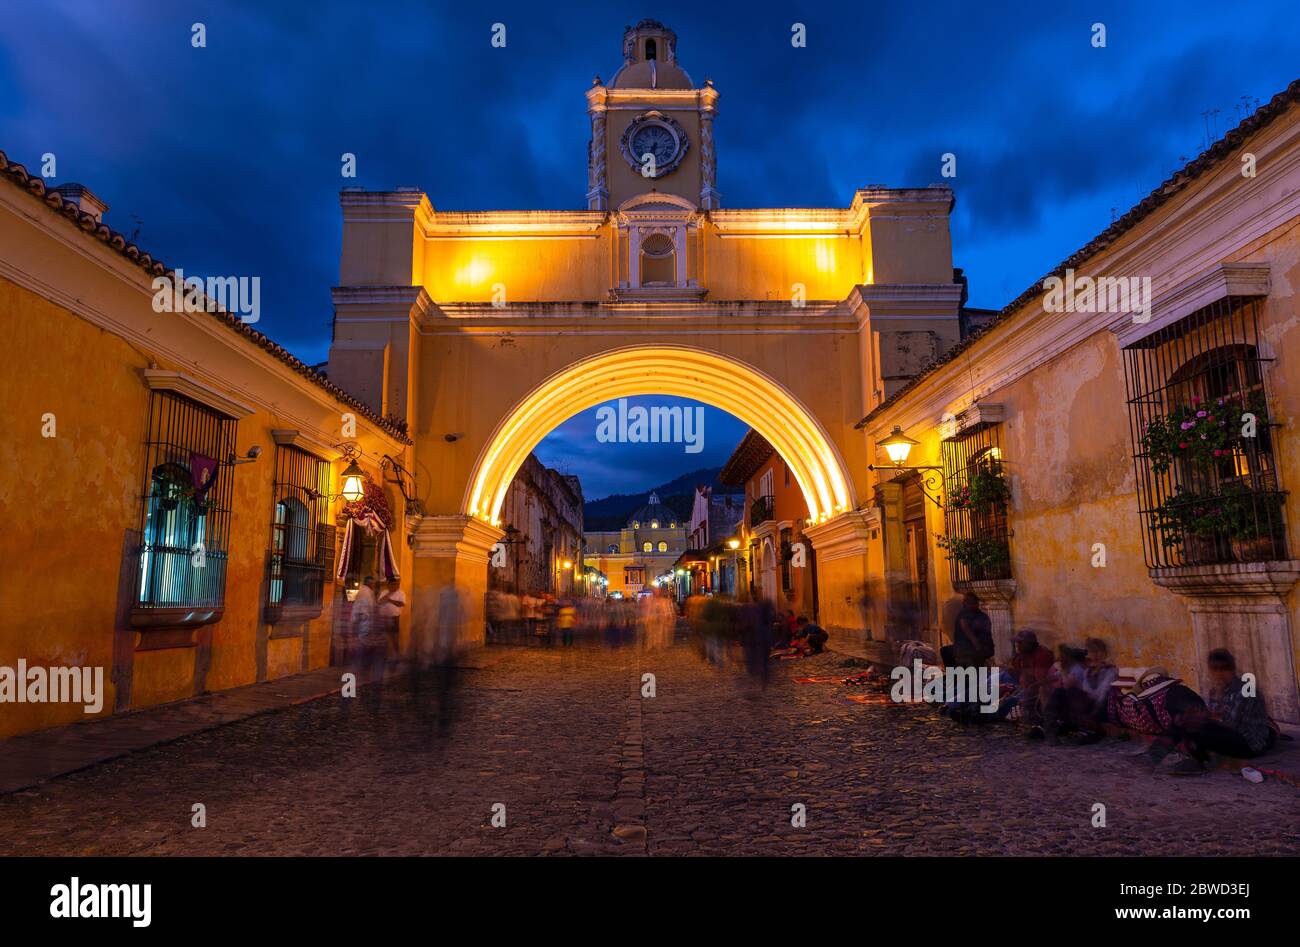 Long exposure at night with motion blur of people by the Santa Catalina Arch, Antigua, Guatemala. Stock Photo